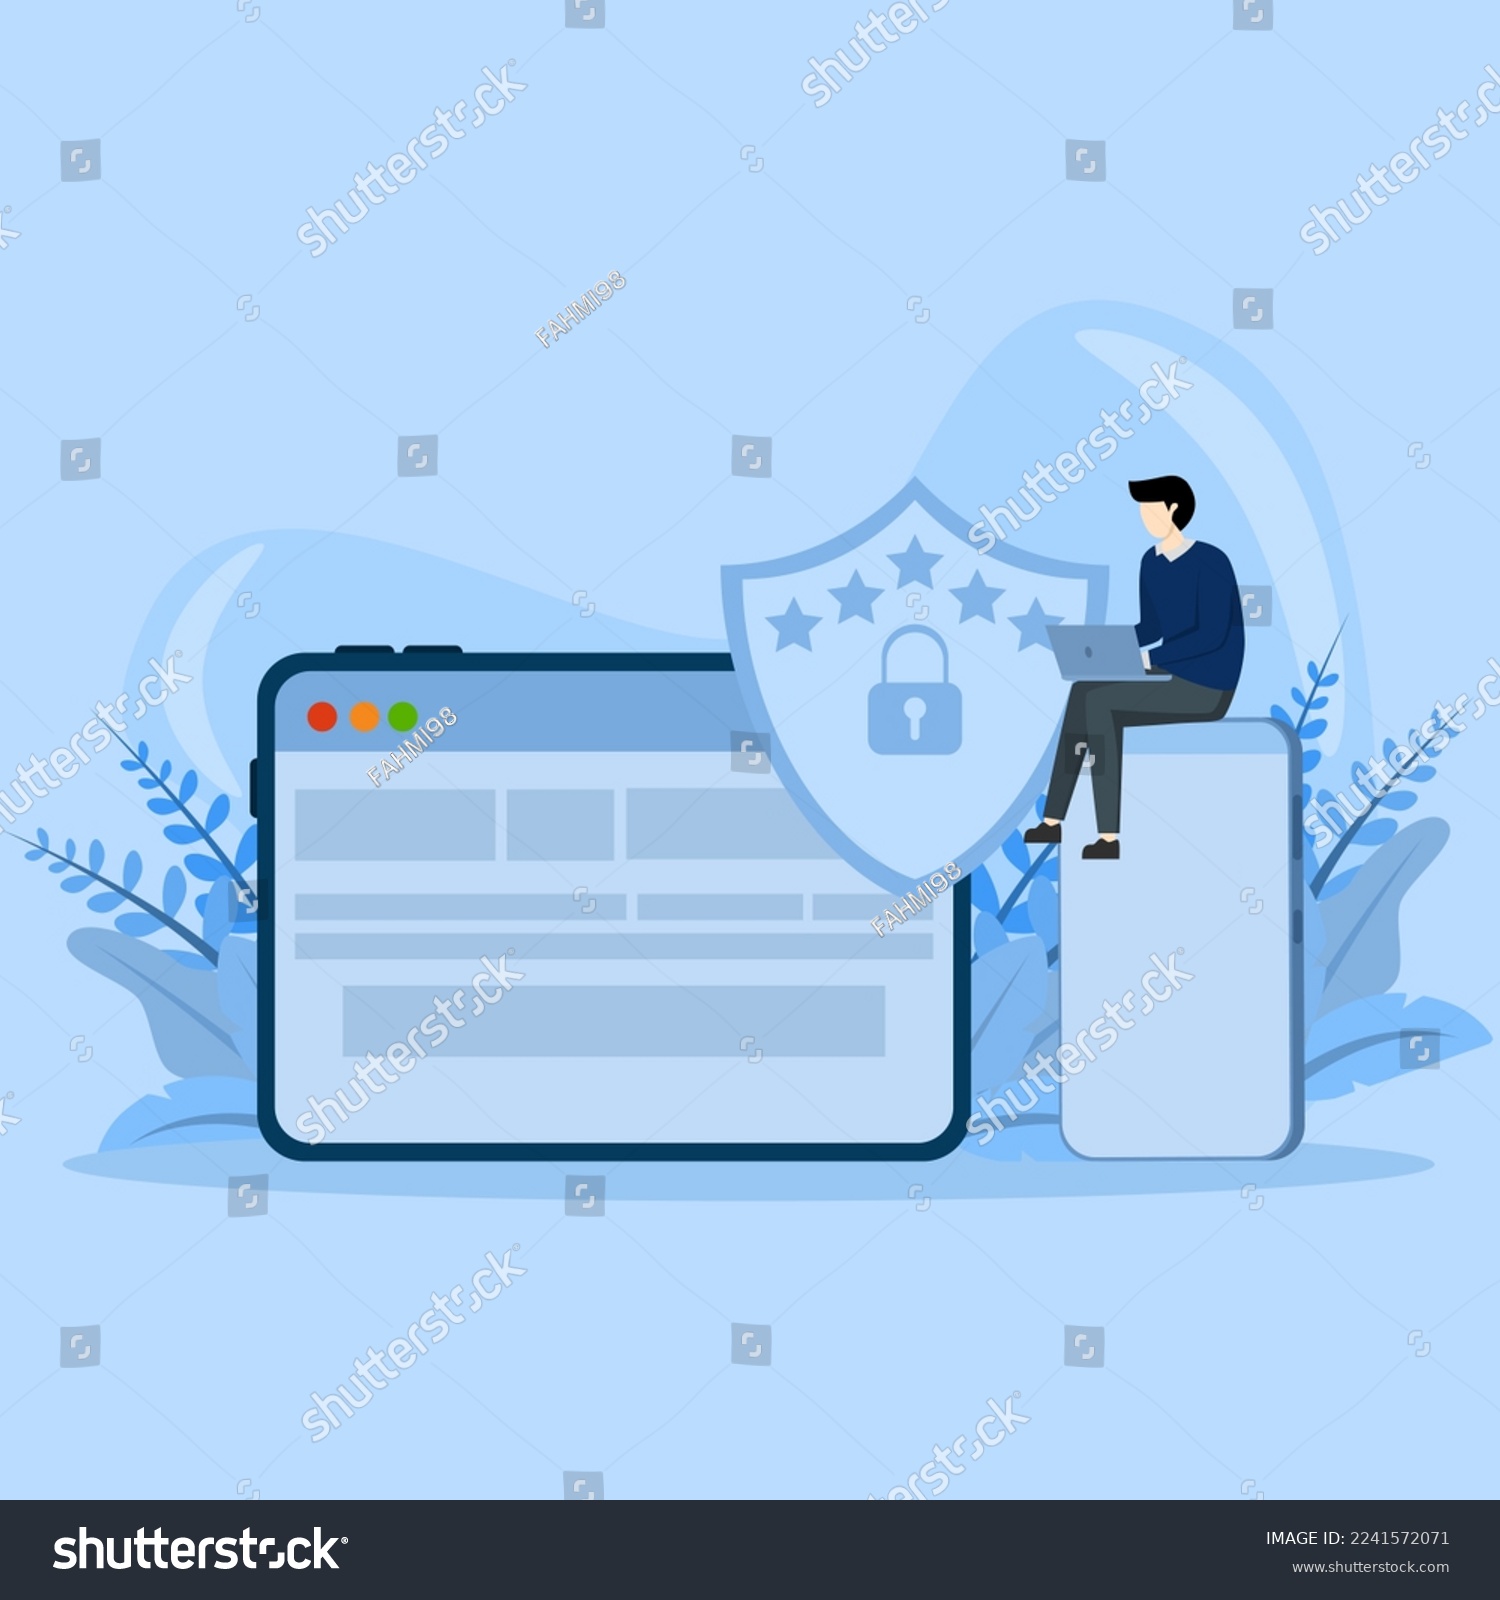 SVG of concept General data protection regulations, Control and security of personal information, browser cookie consent, GDPR disclose data collection Flat vector modern illustration svg